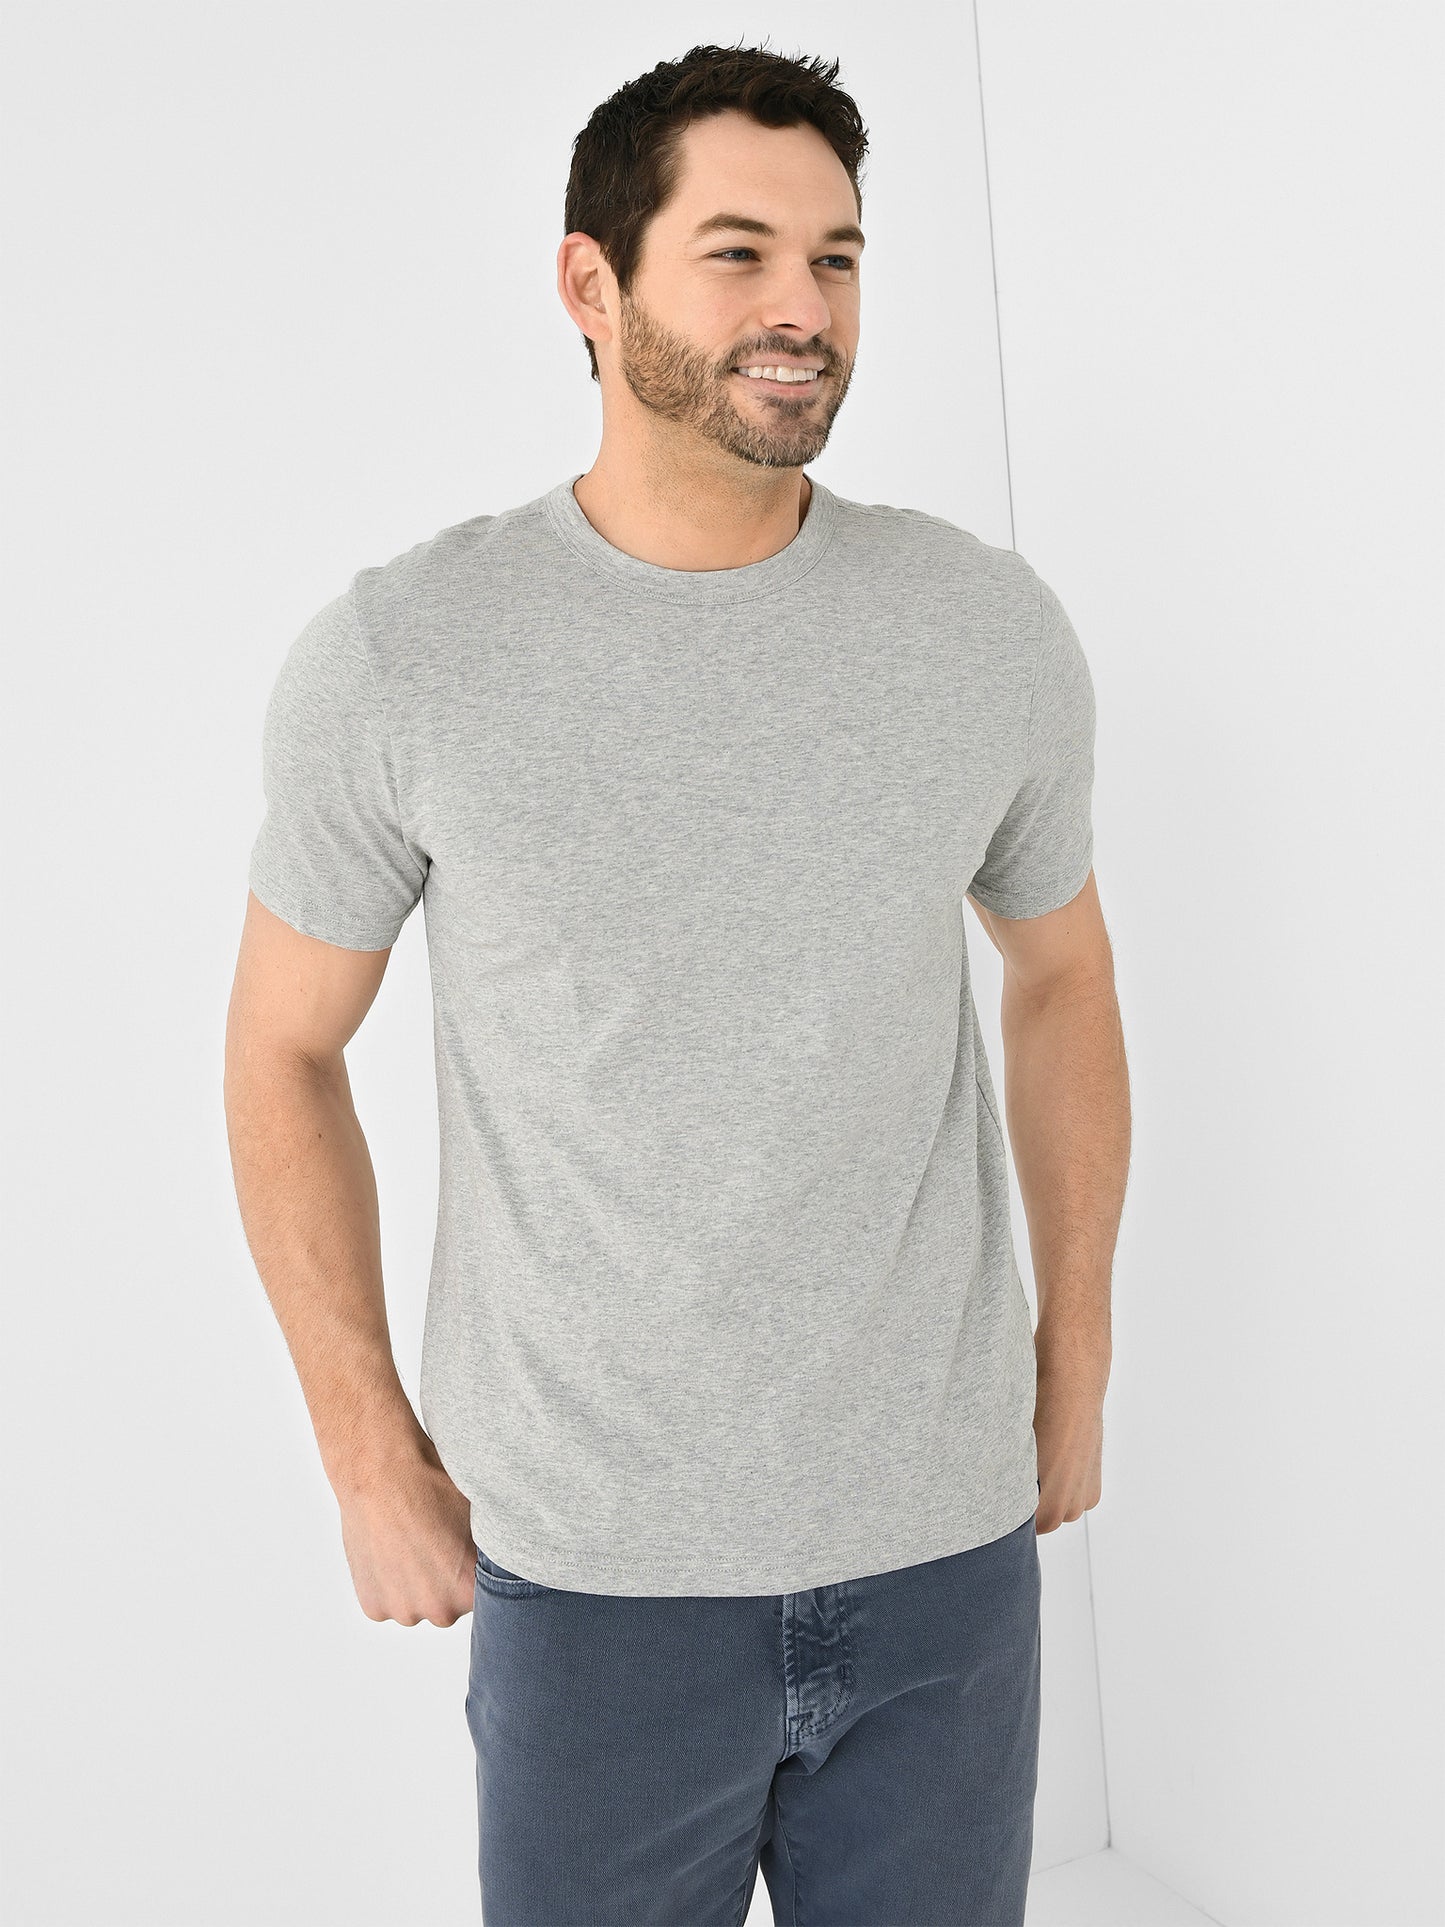 Faherty Brand Men's Sunwashed Tee